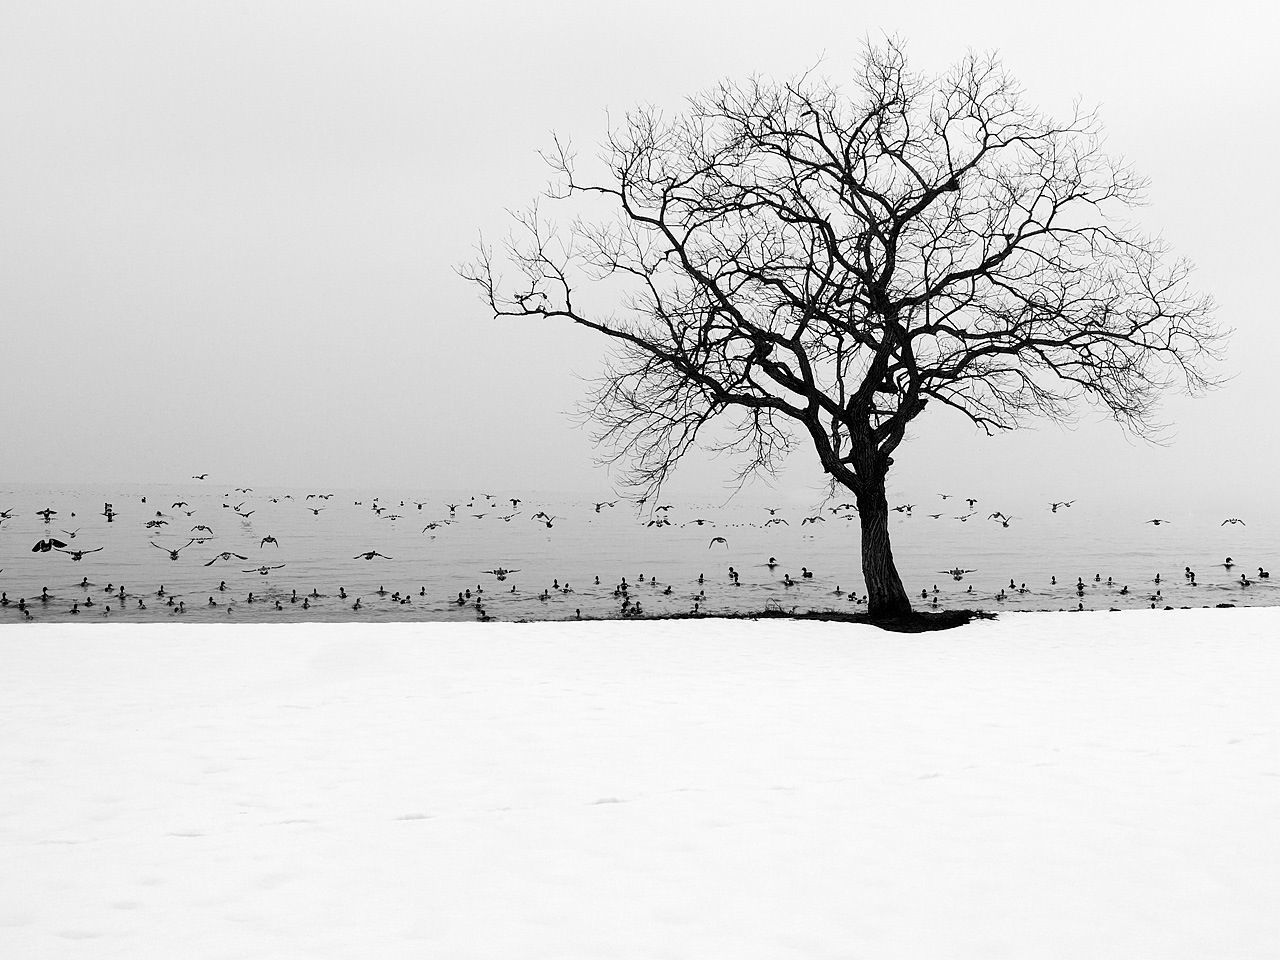 bare tree, clear sky, tree, bird, tranquility, animal themes, winter, landscape, branch, nature, tranquil scene, wildlife, cold temperature, snow, animals in the wild, field, weather, copy space, beauty in nature